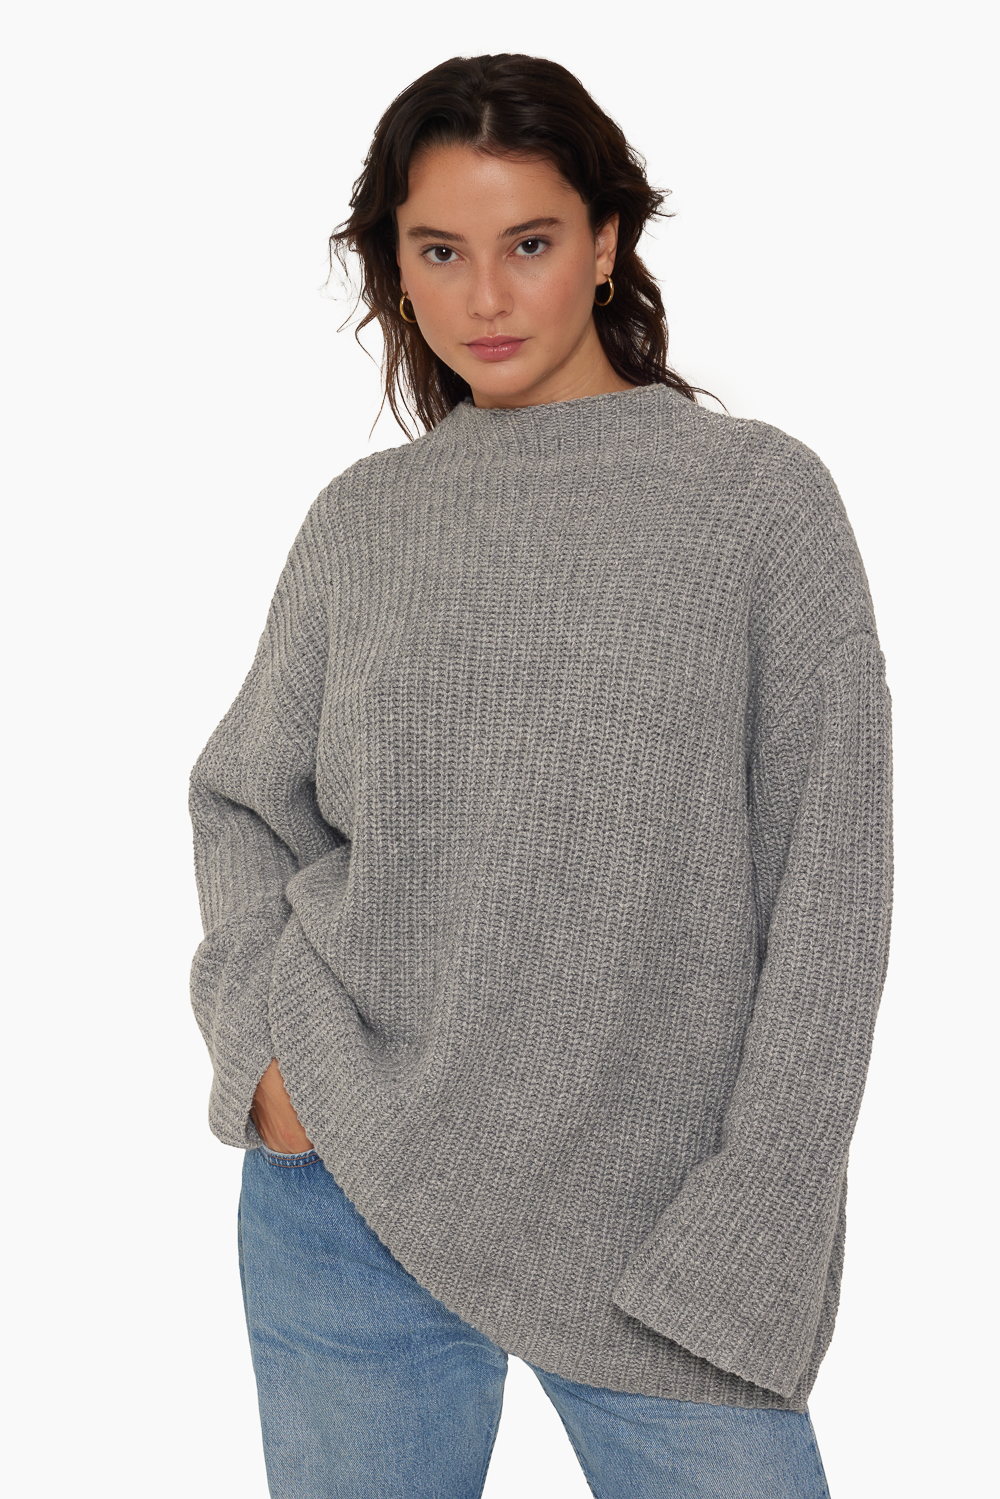 CHUNKY RIB KNIT OVERSIZED MOCK NECK SWEATER - MARBLE Featured Image